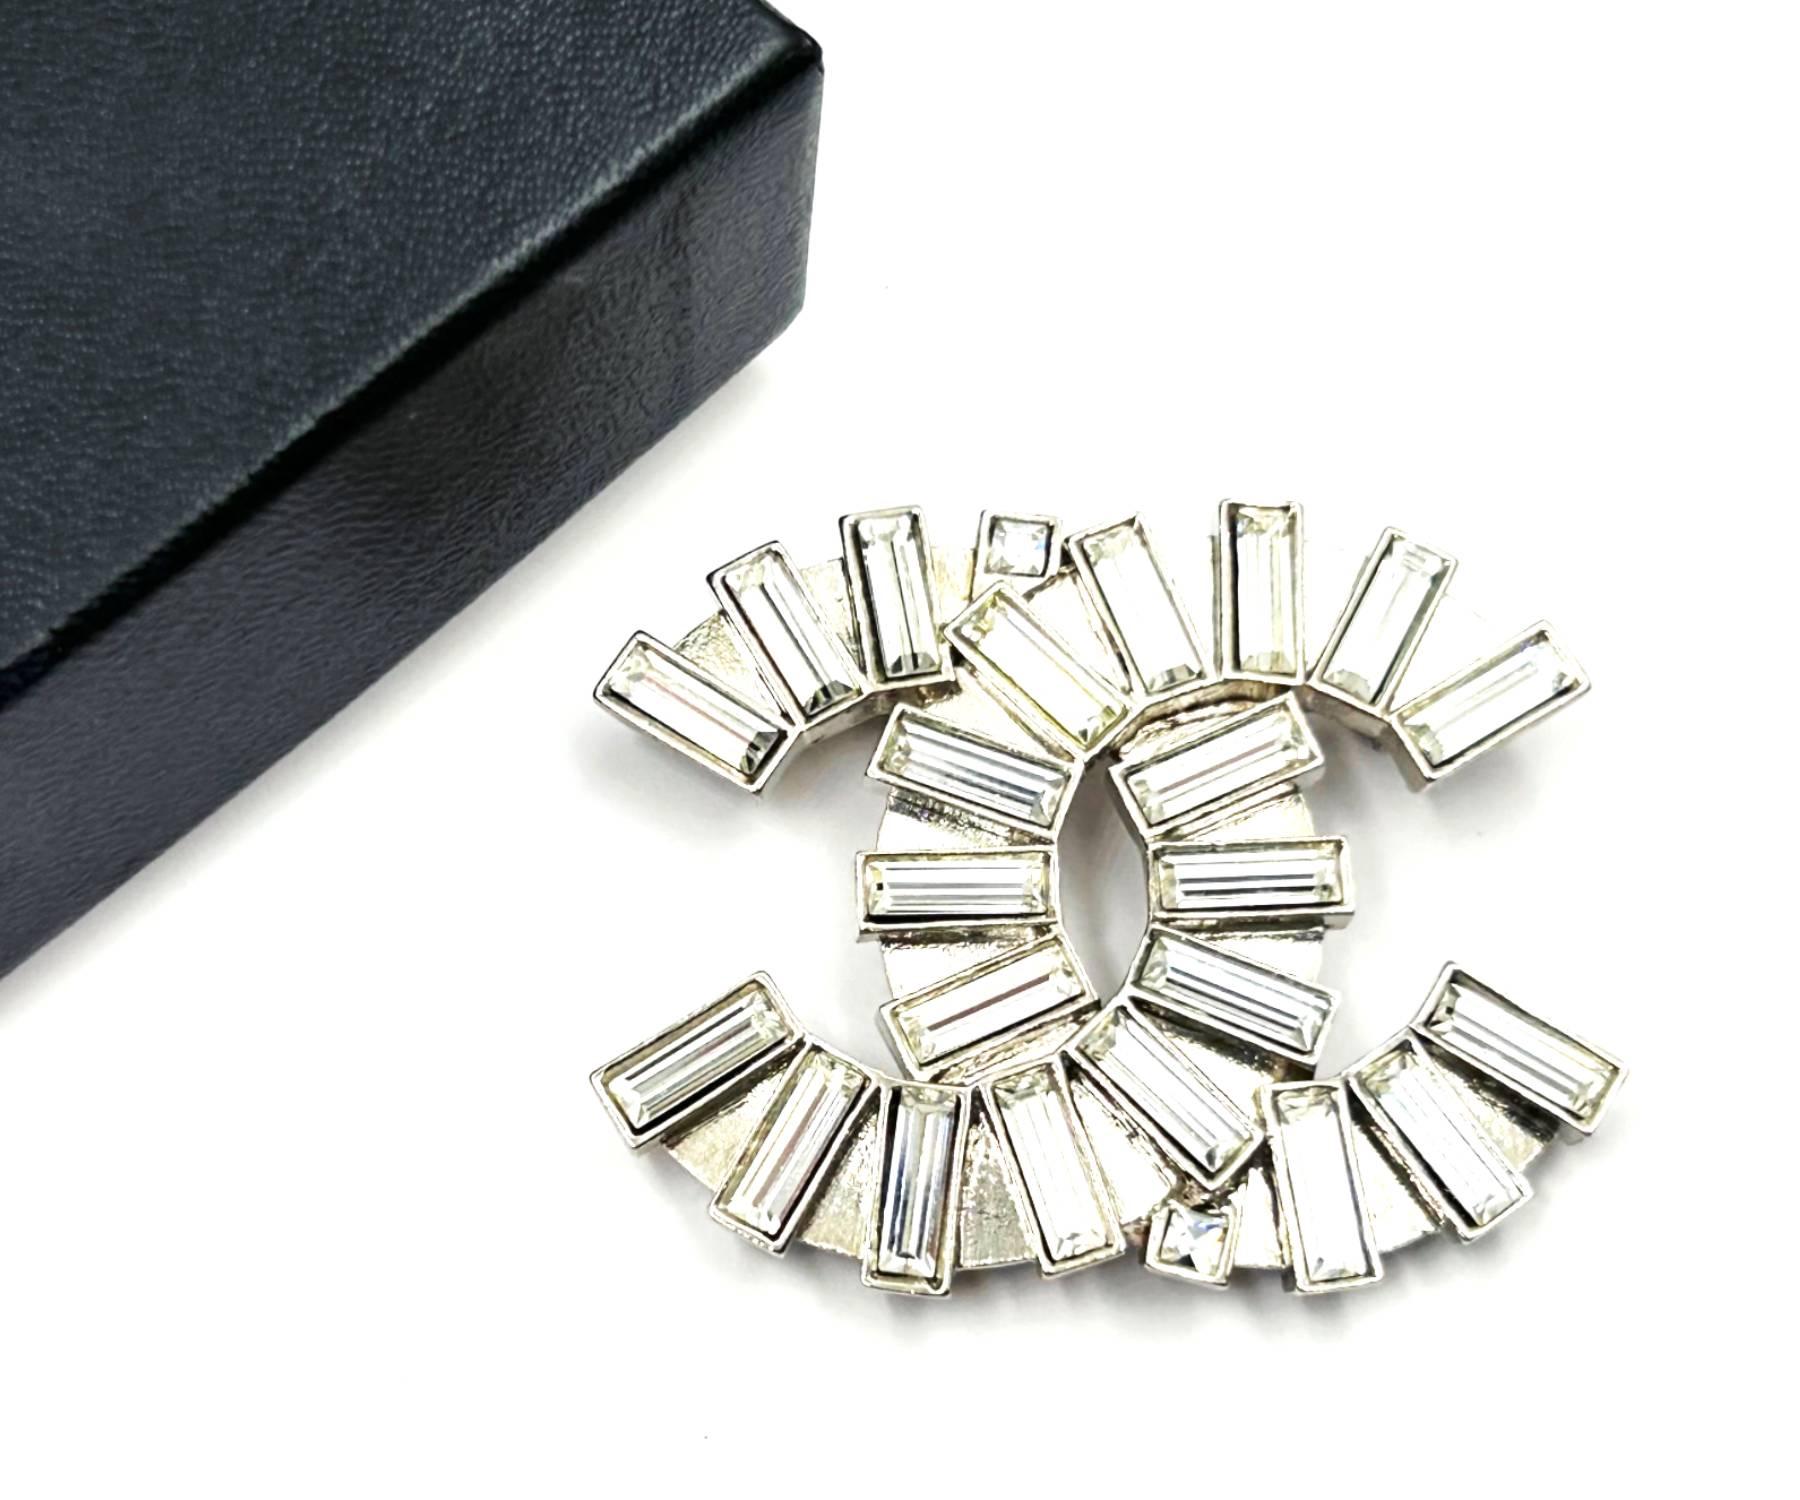 Chanel Silver CC Baguette Crystal Large Brooch

*Marked 06
*Made in France

-It's approximately 2.25